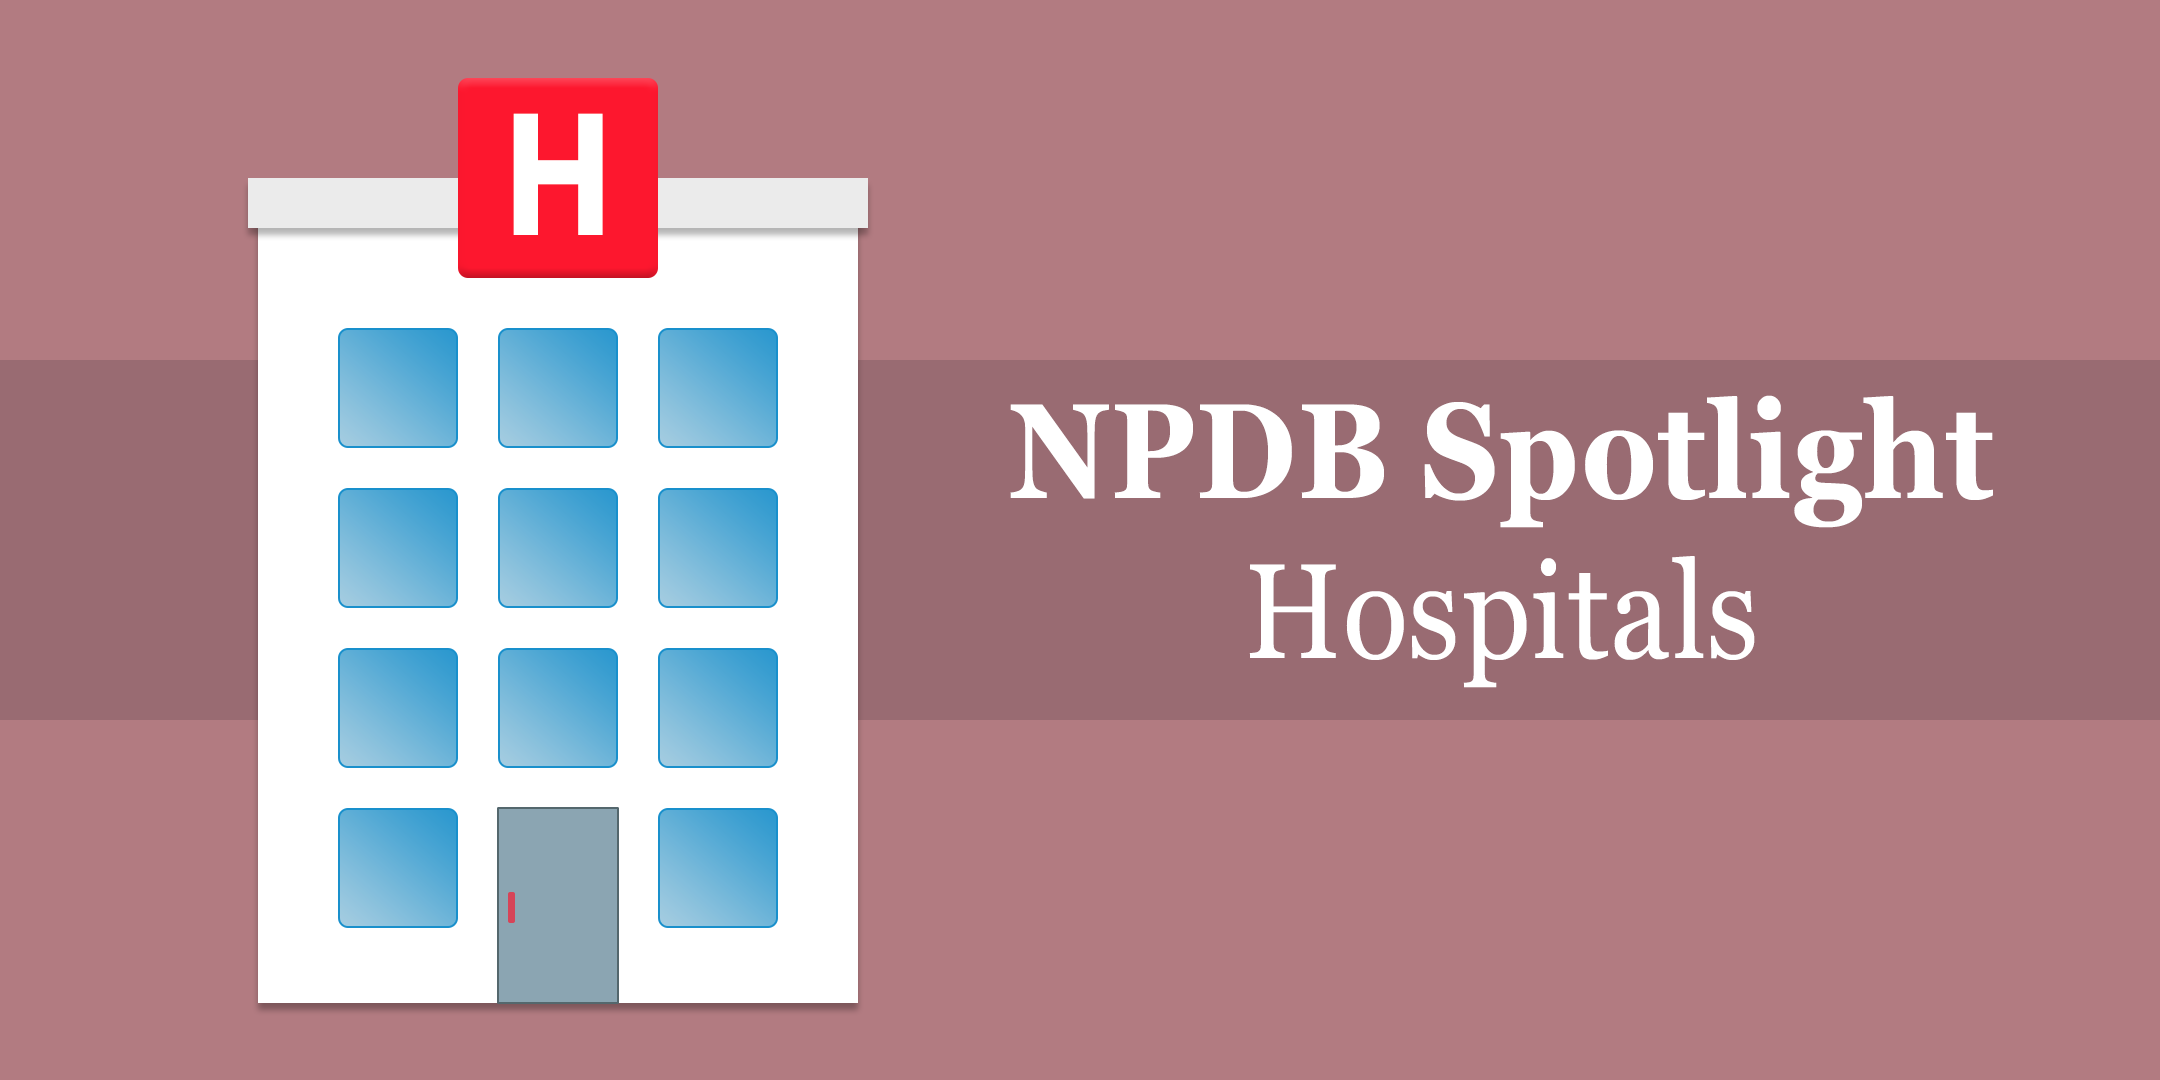 Image with a hospital and NPDB Spotlight Hospitals text